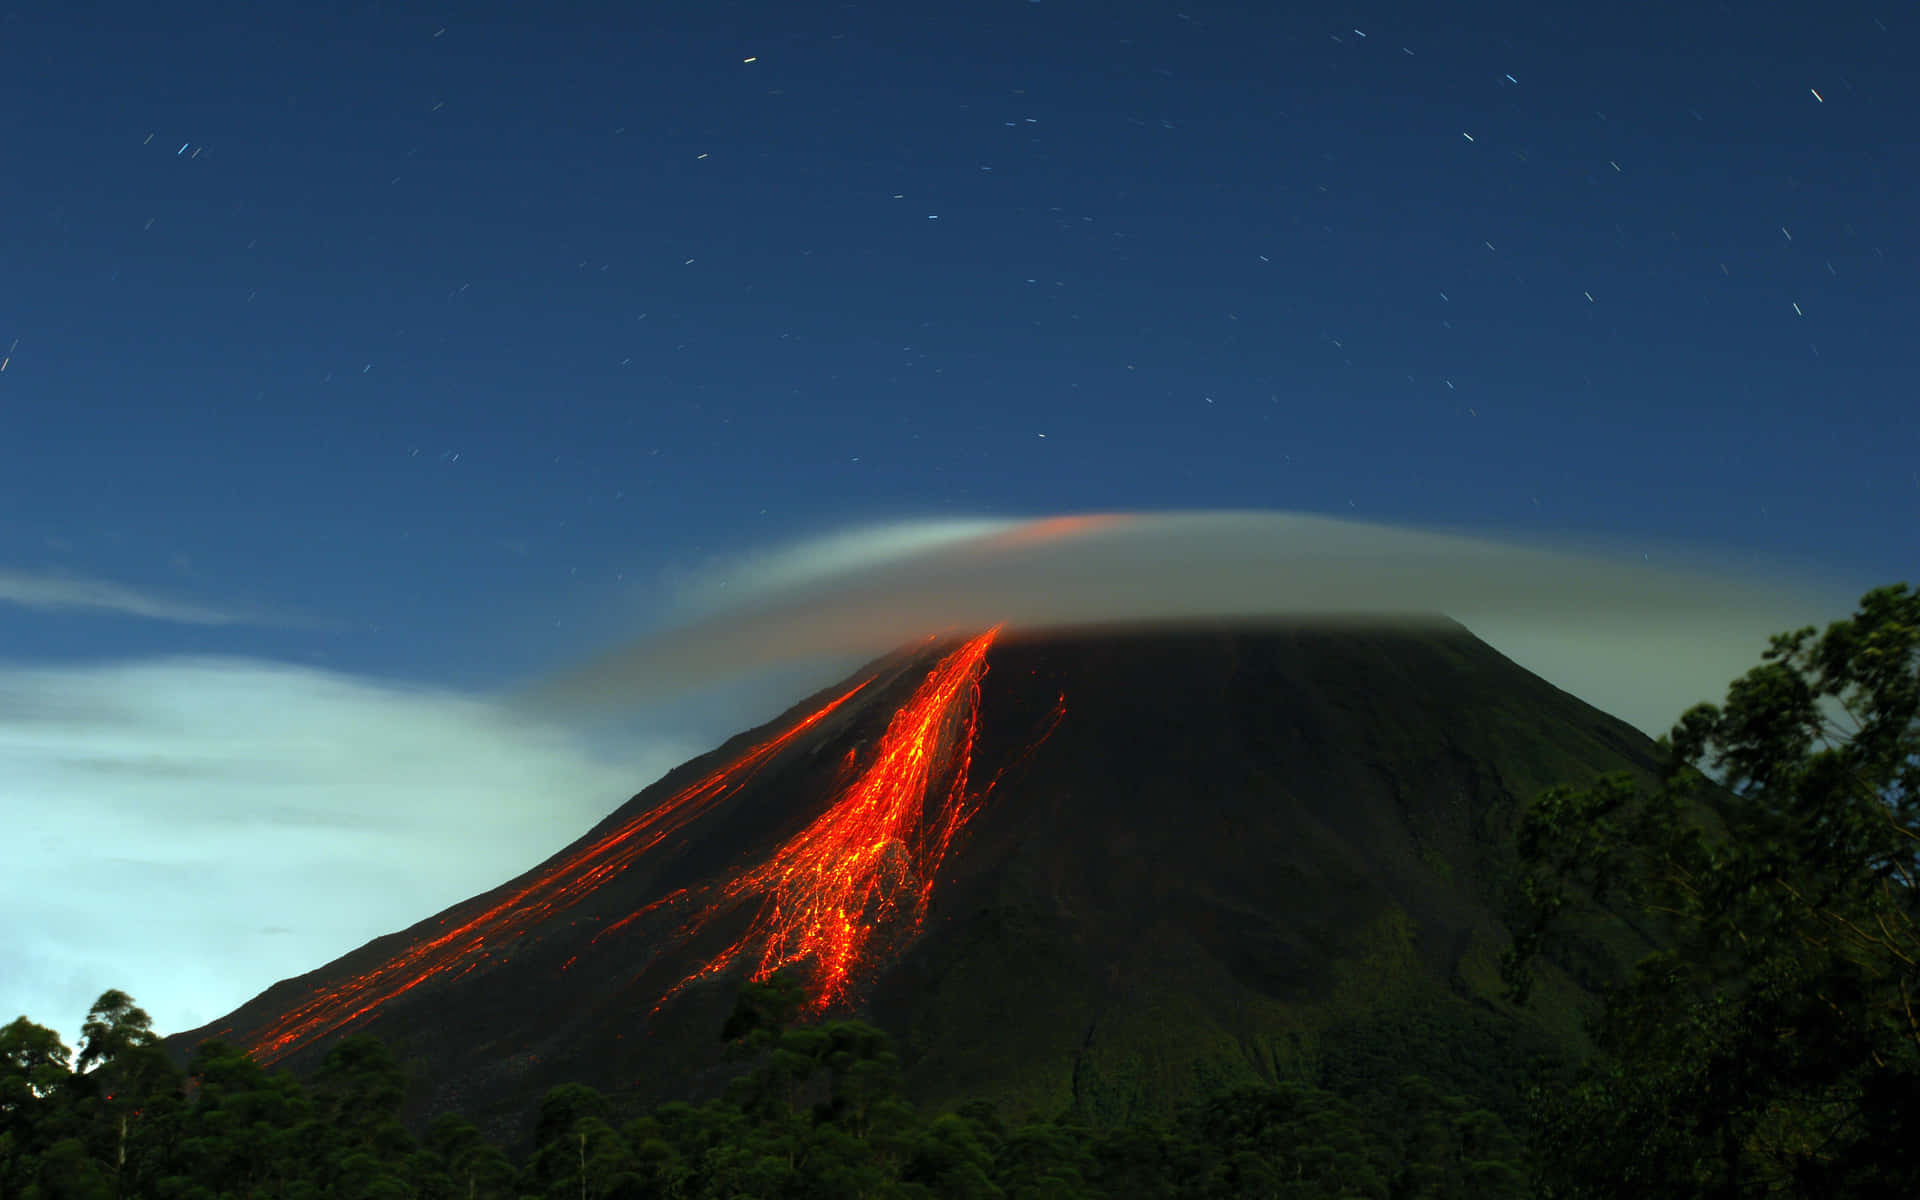 A striking view of a volcanic eruption